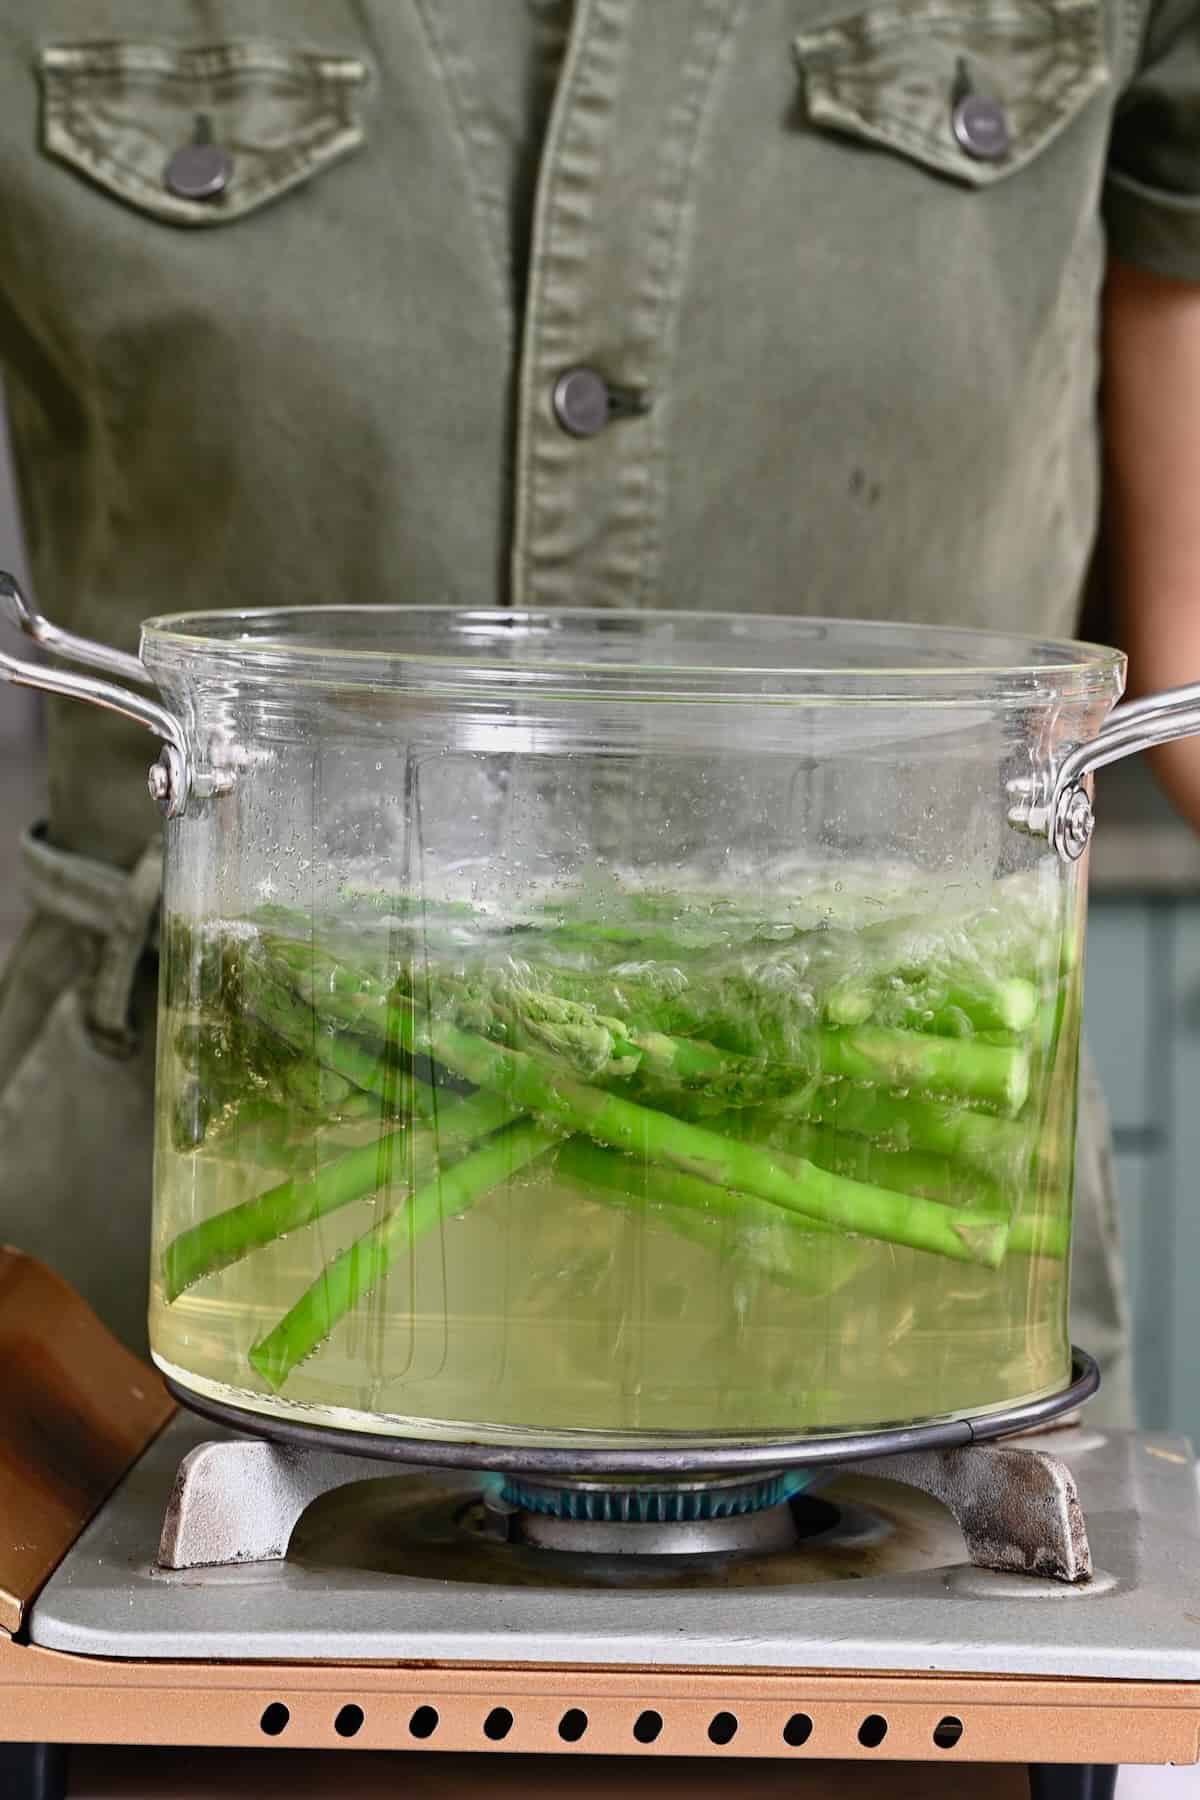 Boiling asparagus in a pot